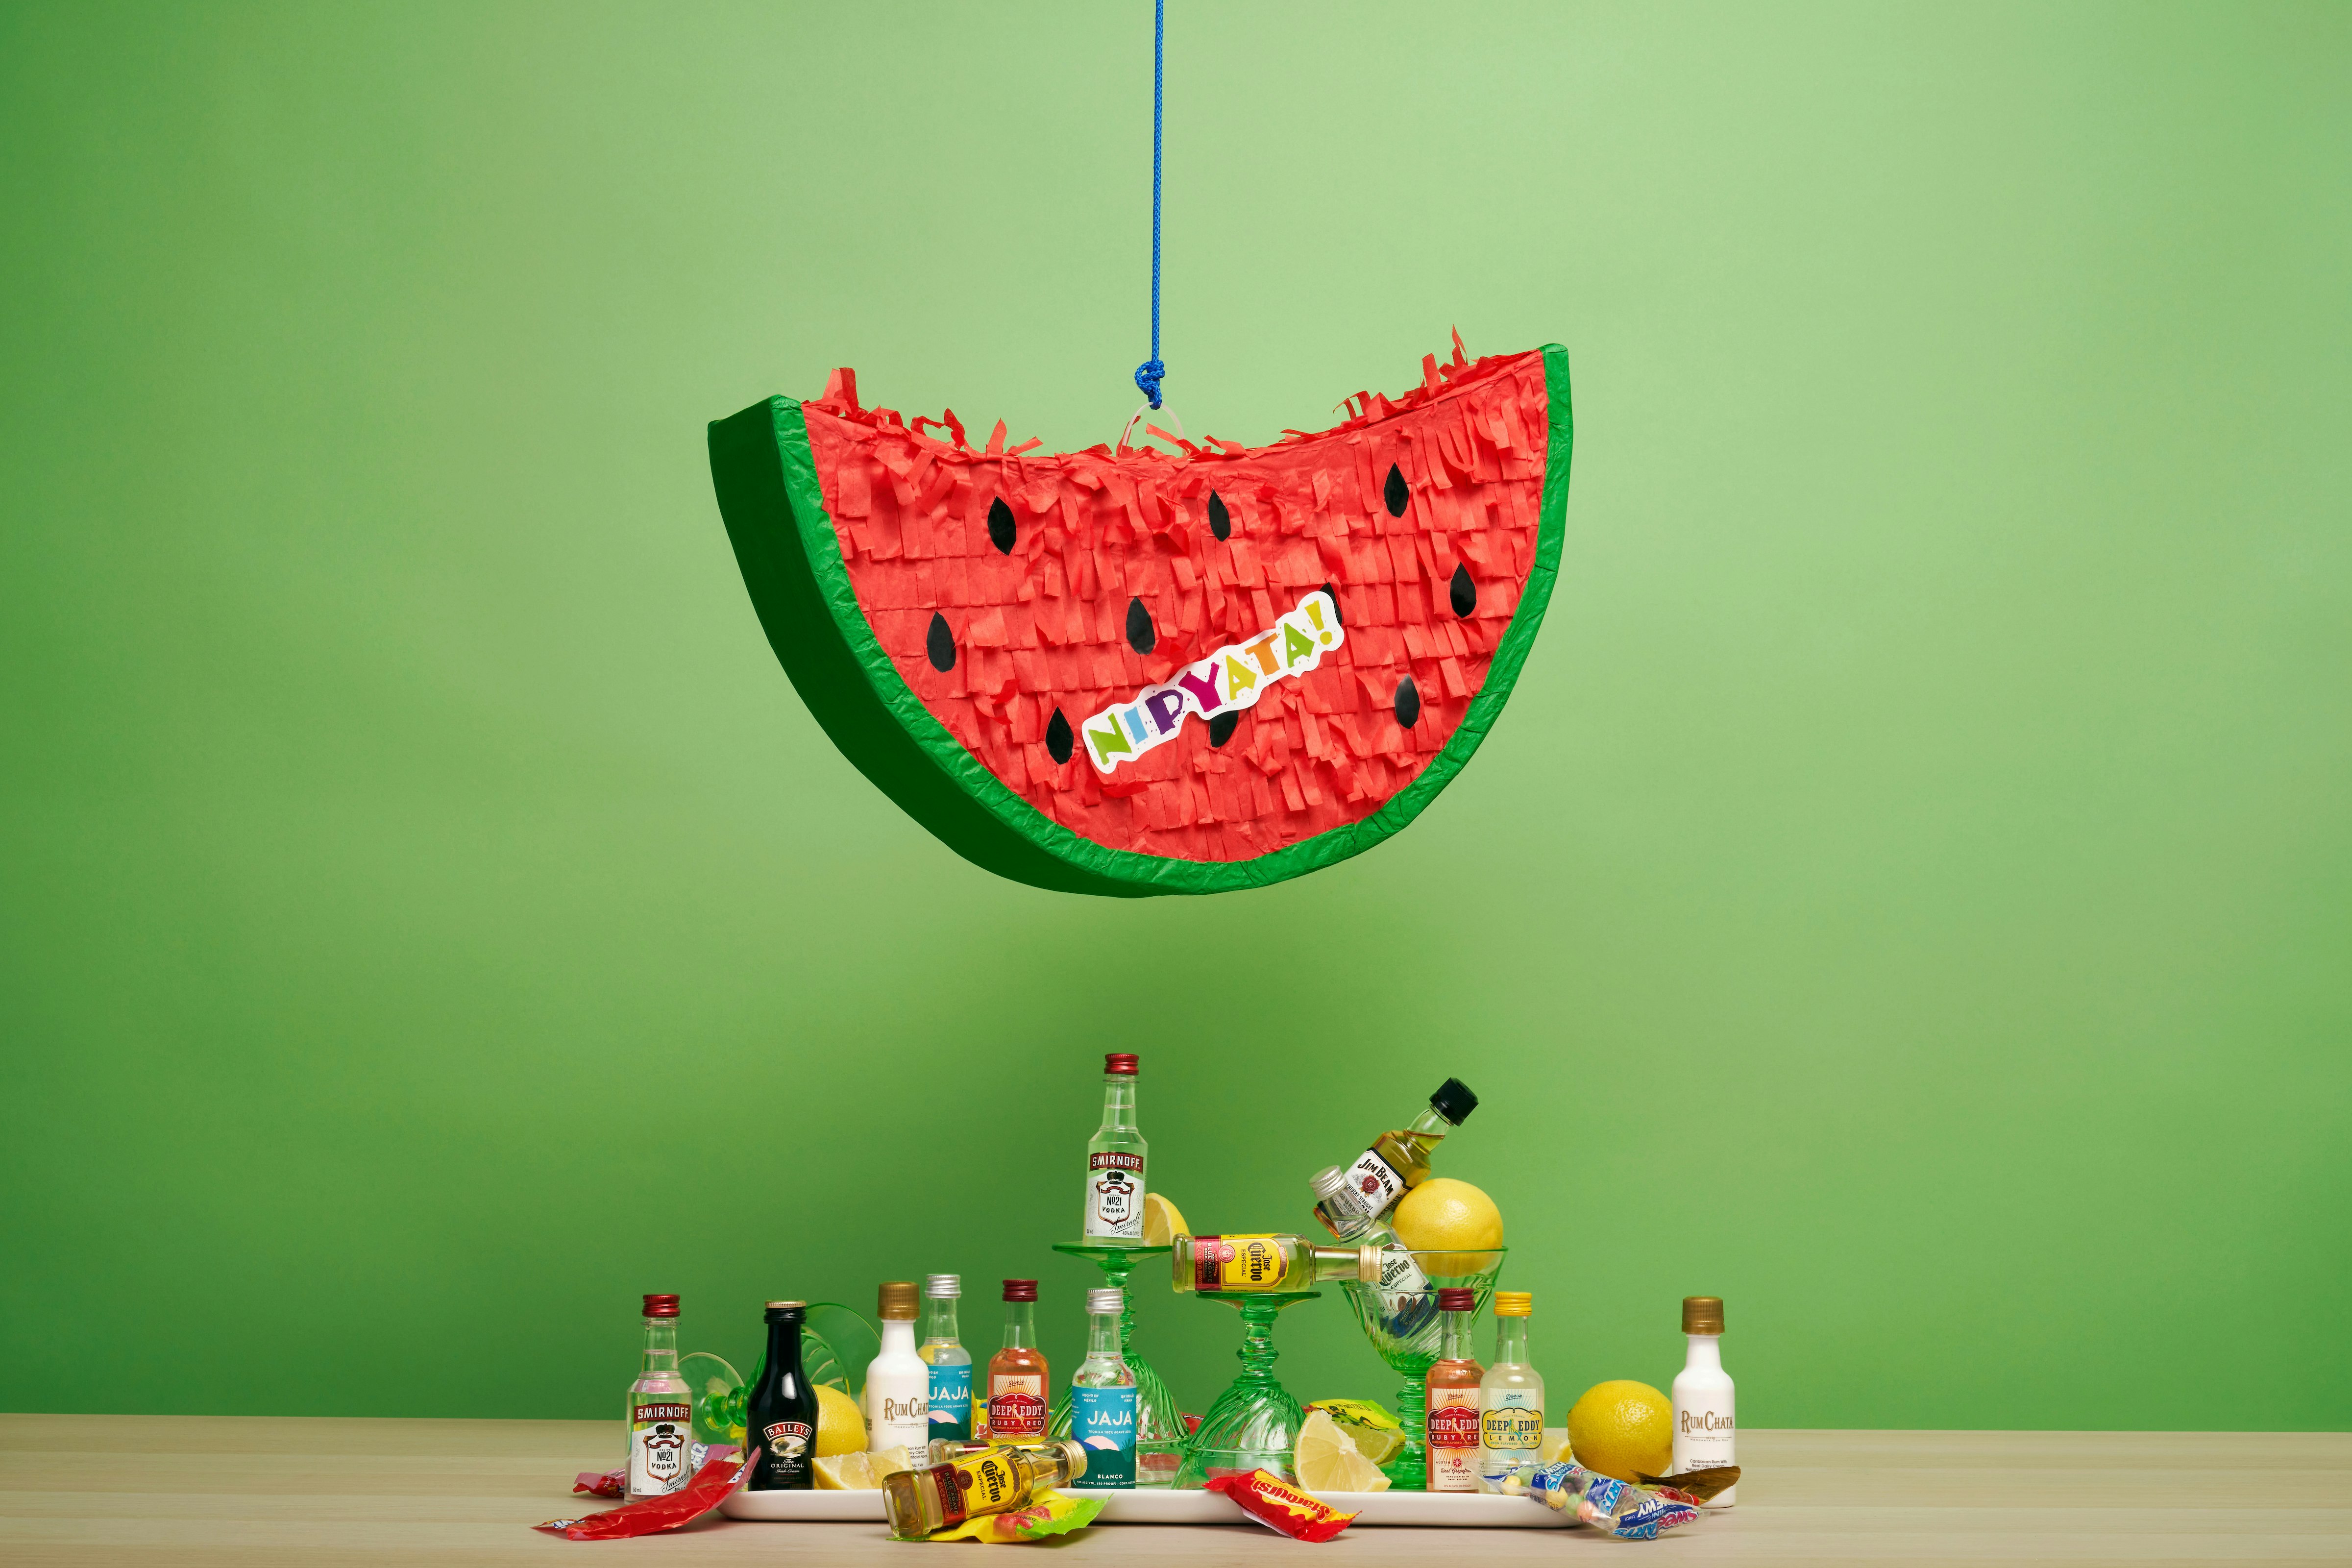 A watermelon piñata filled with mini plastic bottles of the best liquor and candies. The ultimate boozy gift.